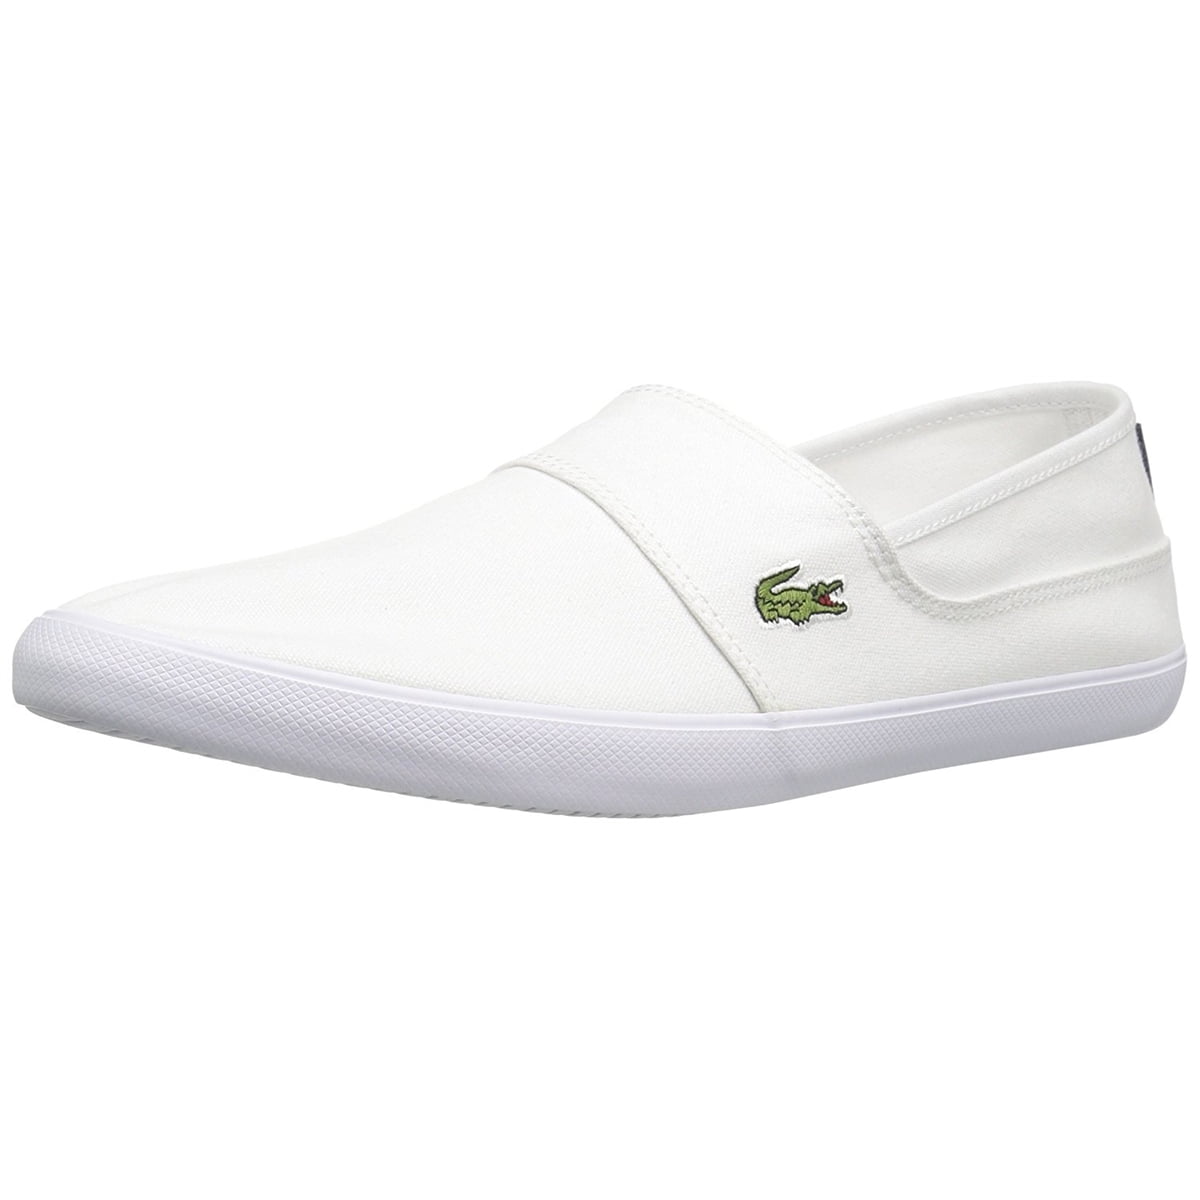 Lacoste Marice BL 2 Men's Croc Logo Casual Slip On Loafer shoes Sneakers White 